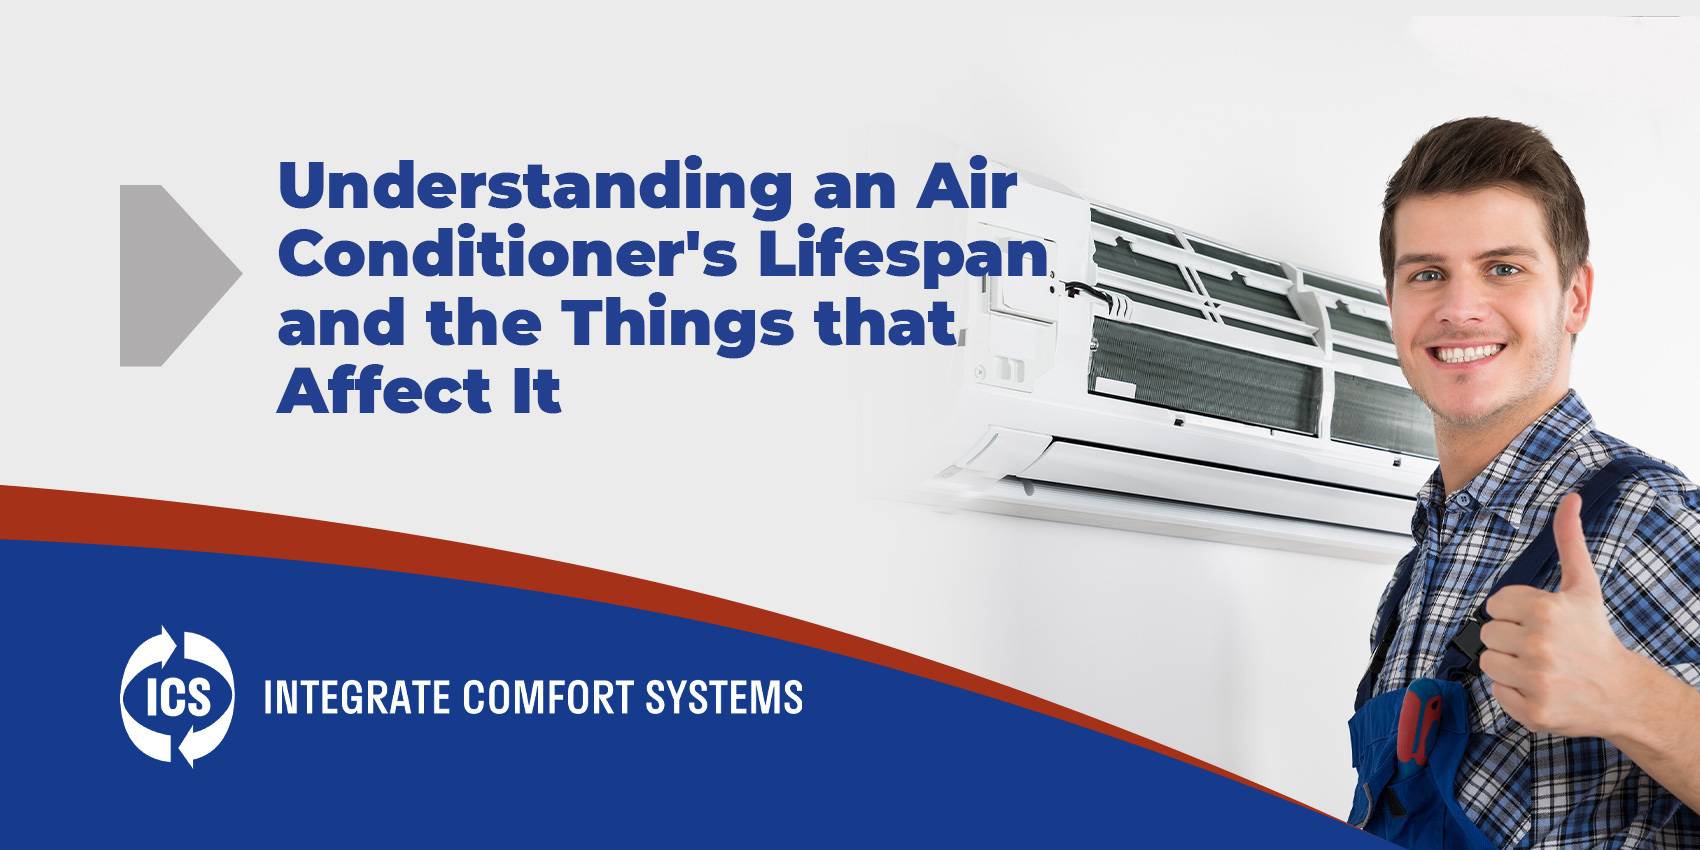 understanding an air conditioner's lifespan and the things that affect it